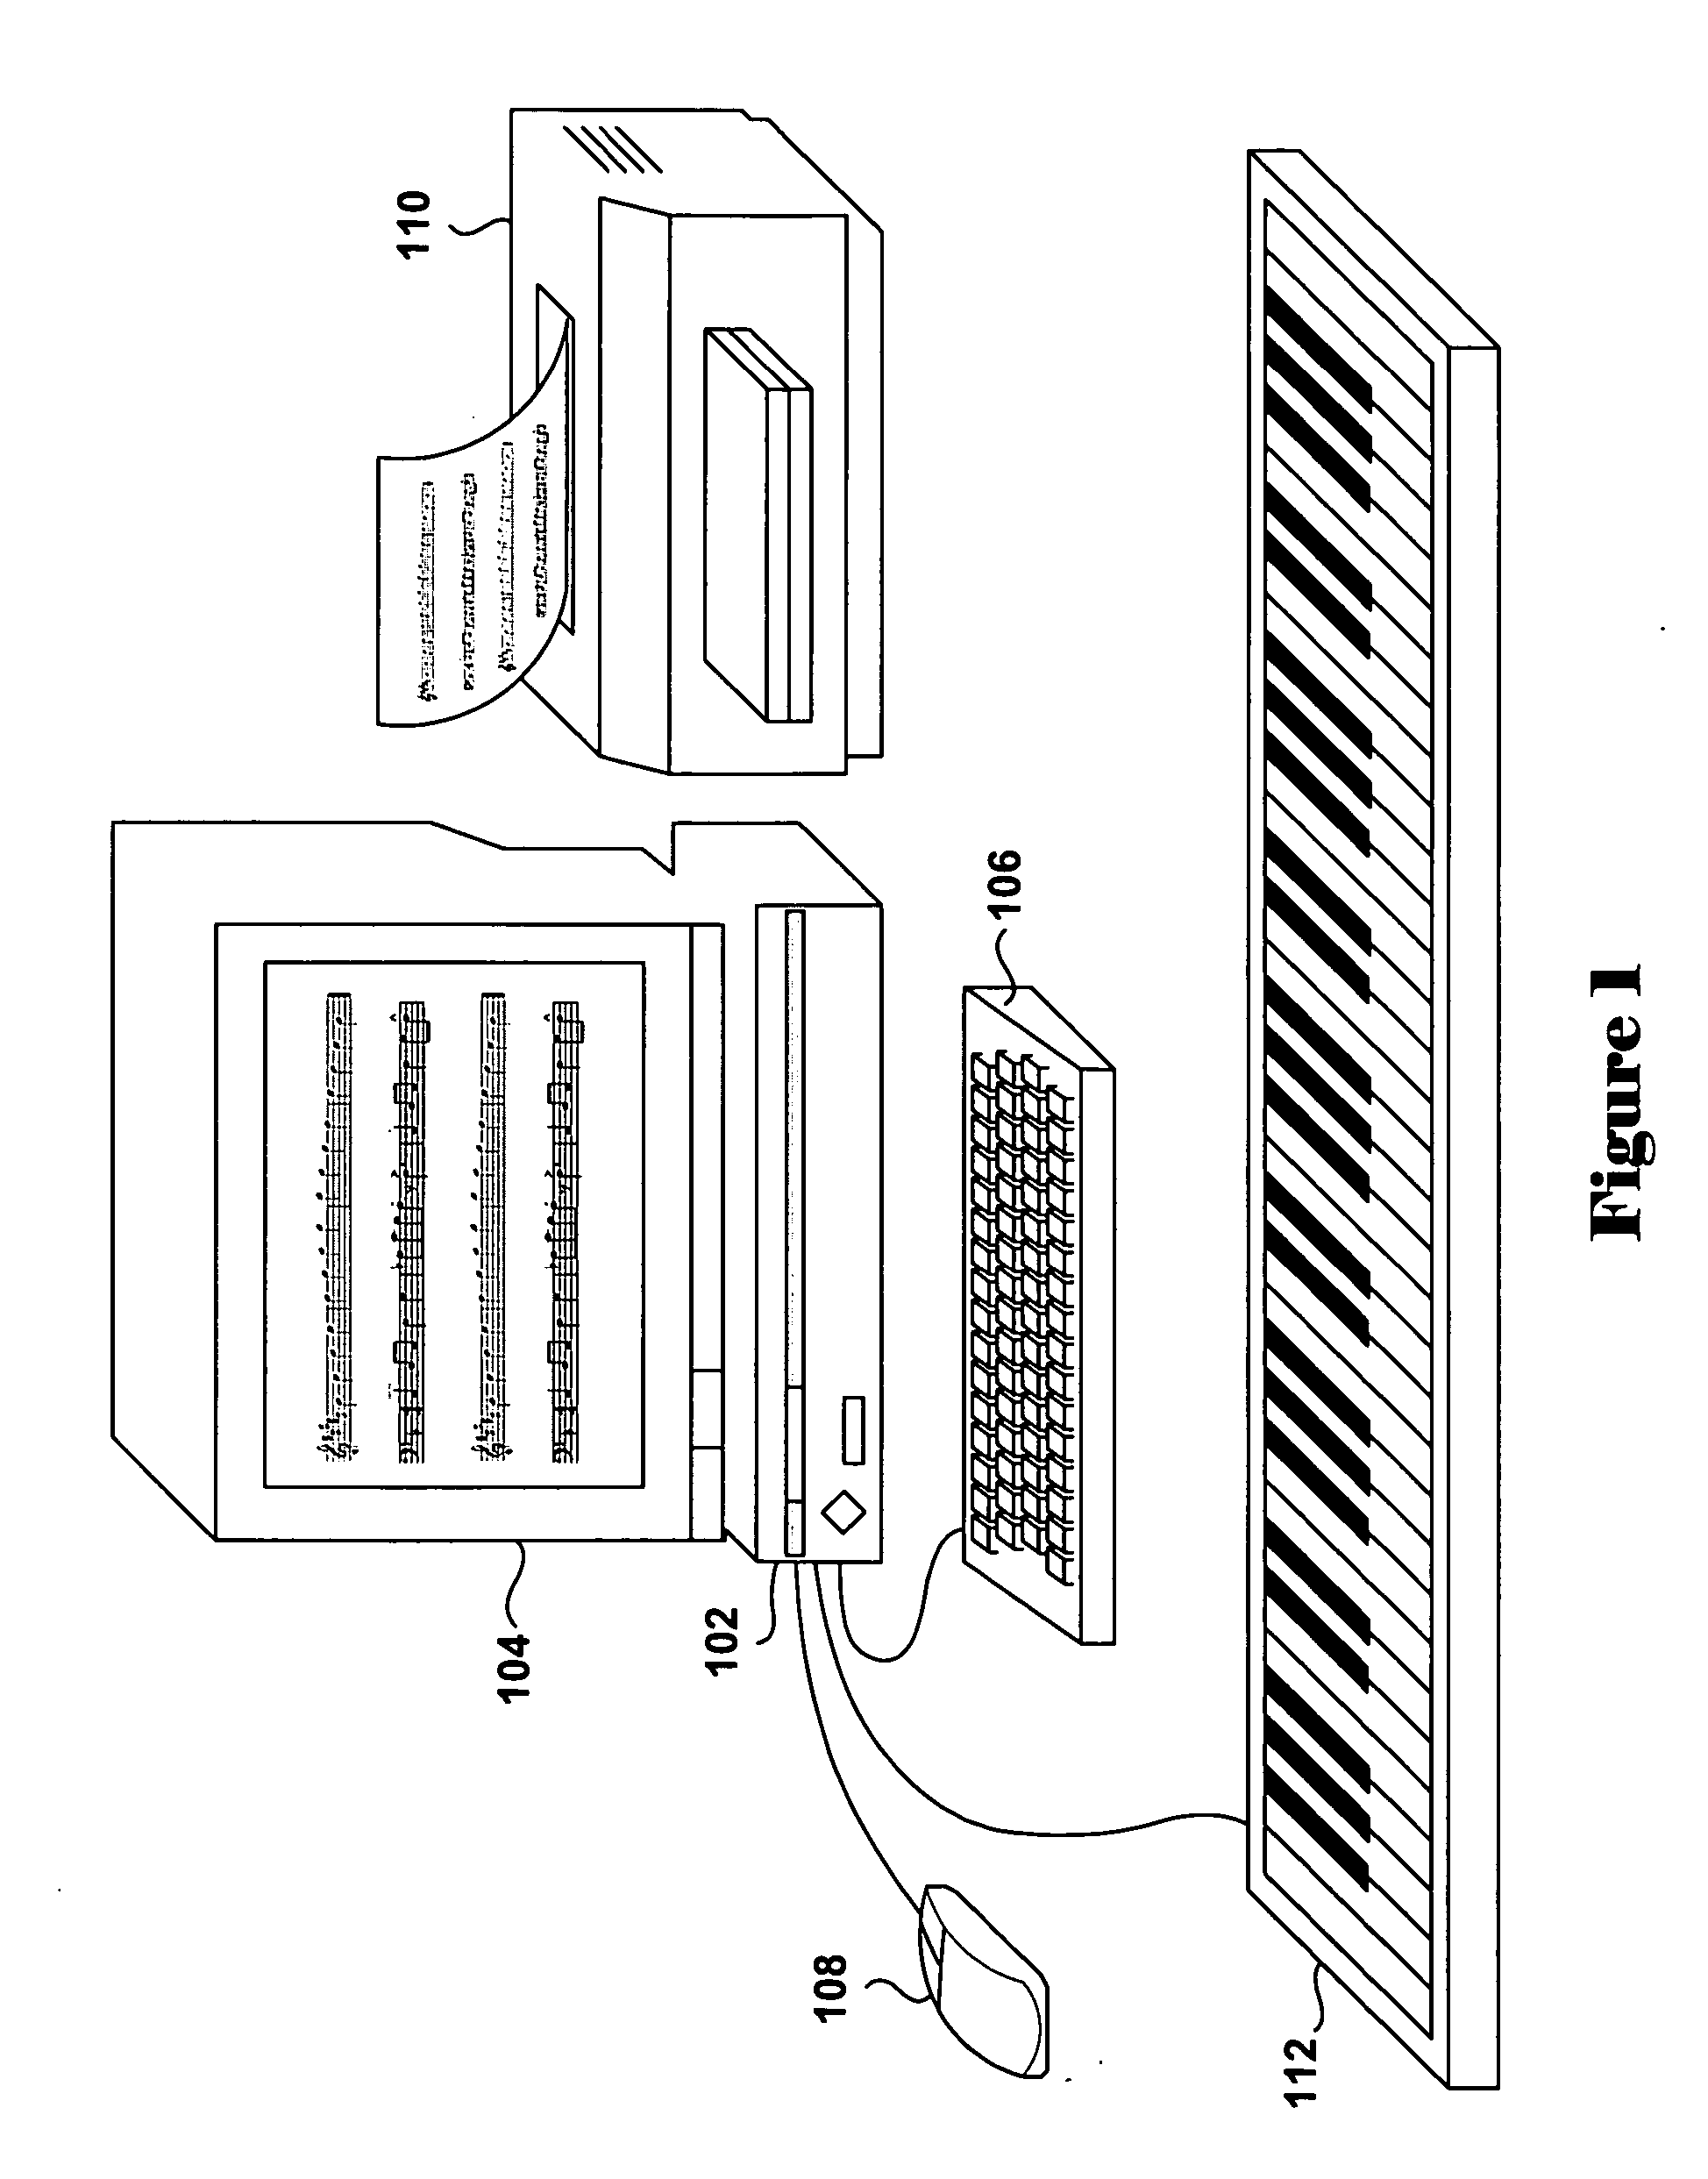 Method and system for generating musical variations directed to particular skill levels